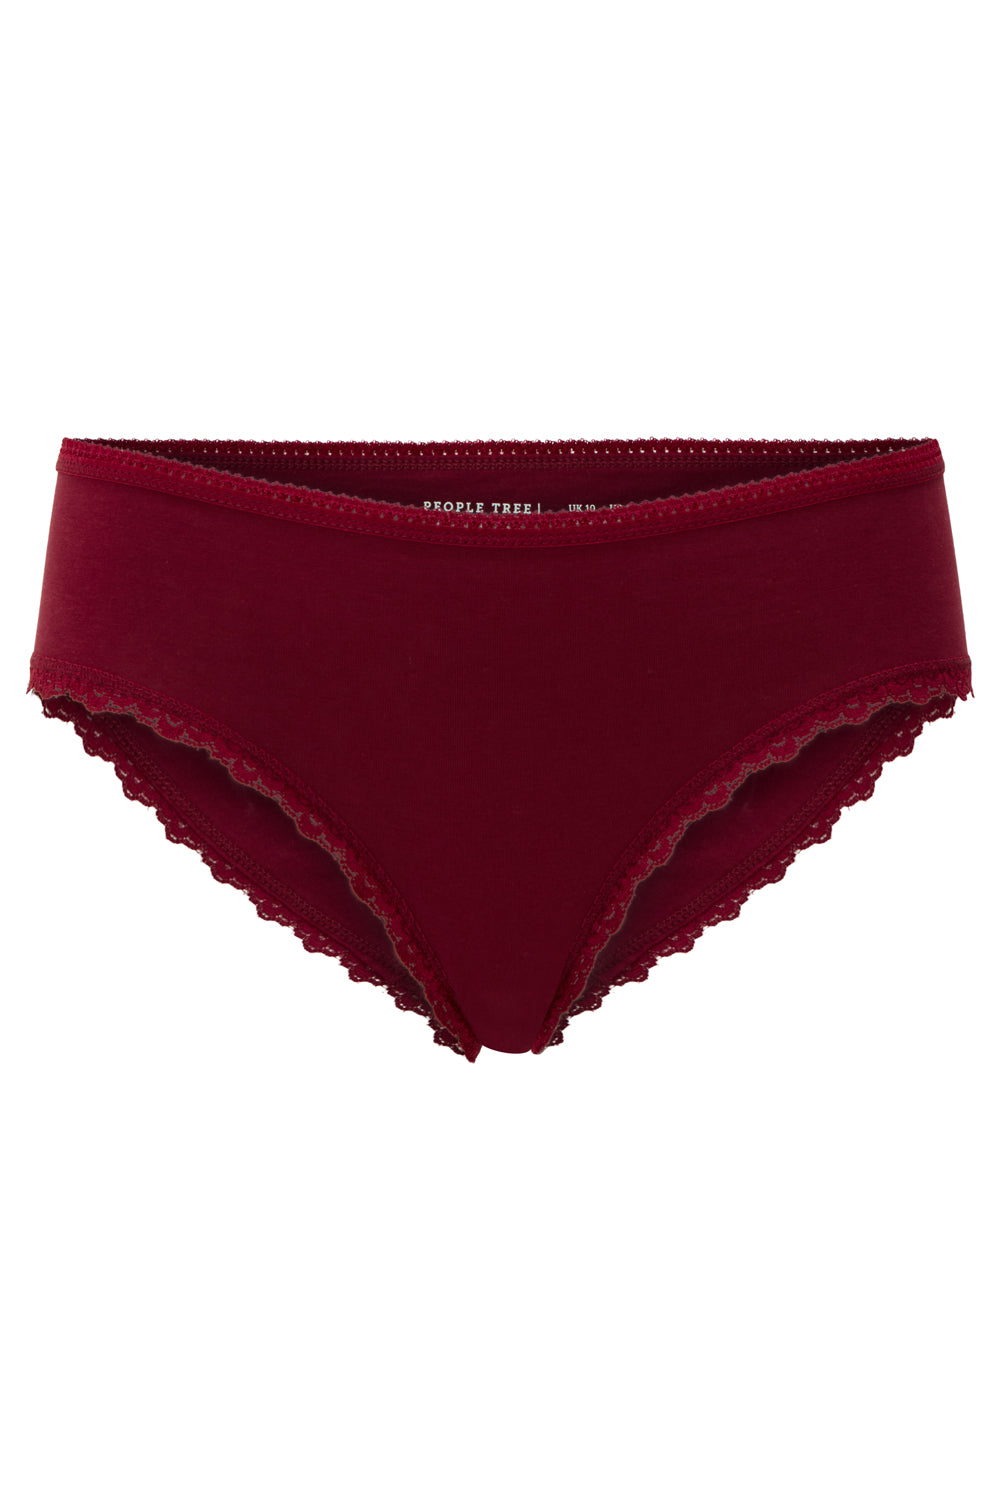 People Tree Hipsters Lace Burgundy